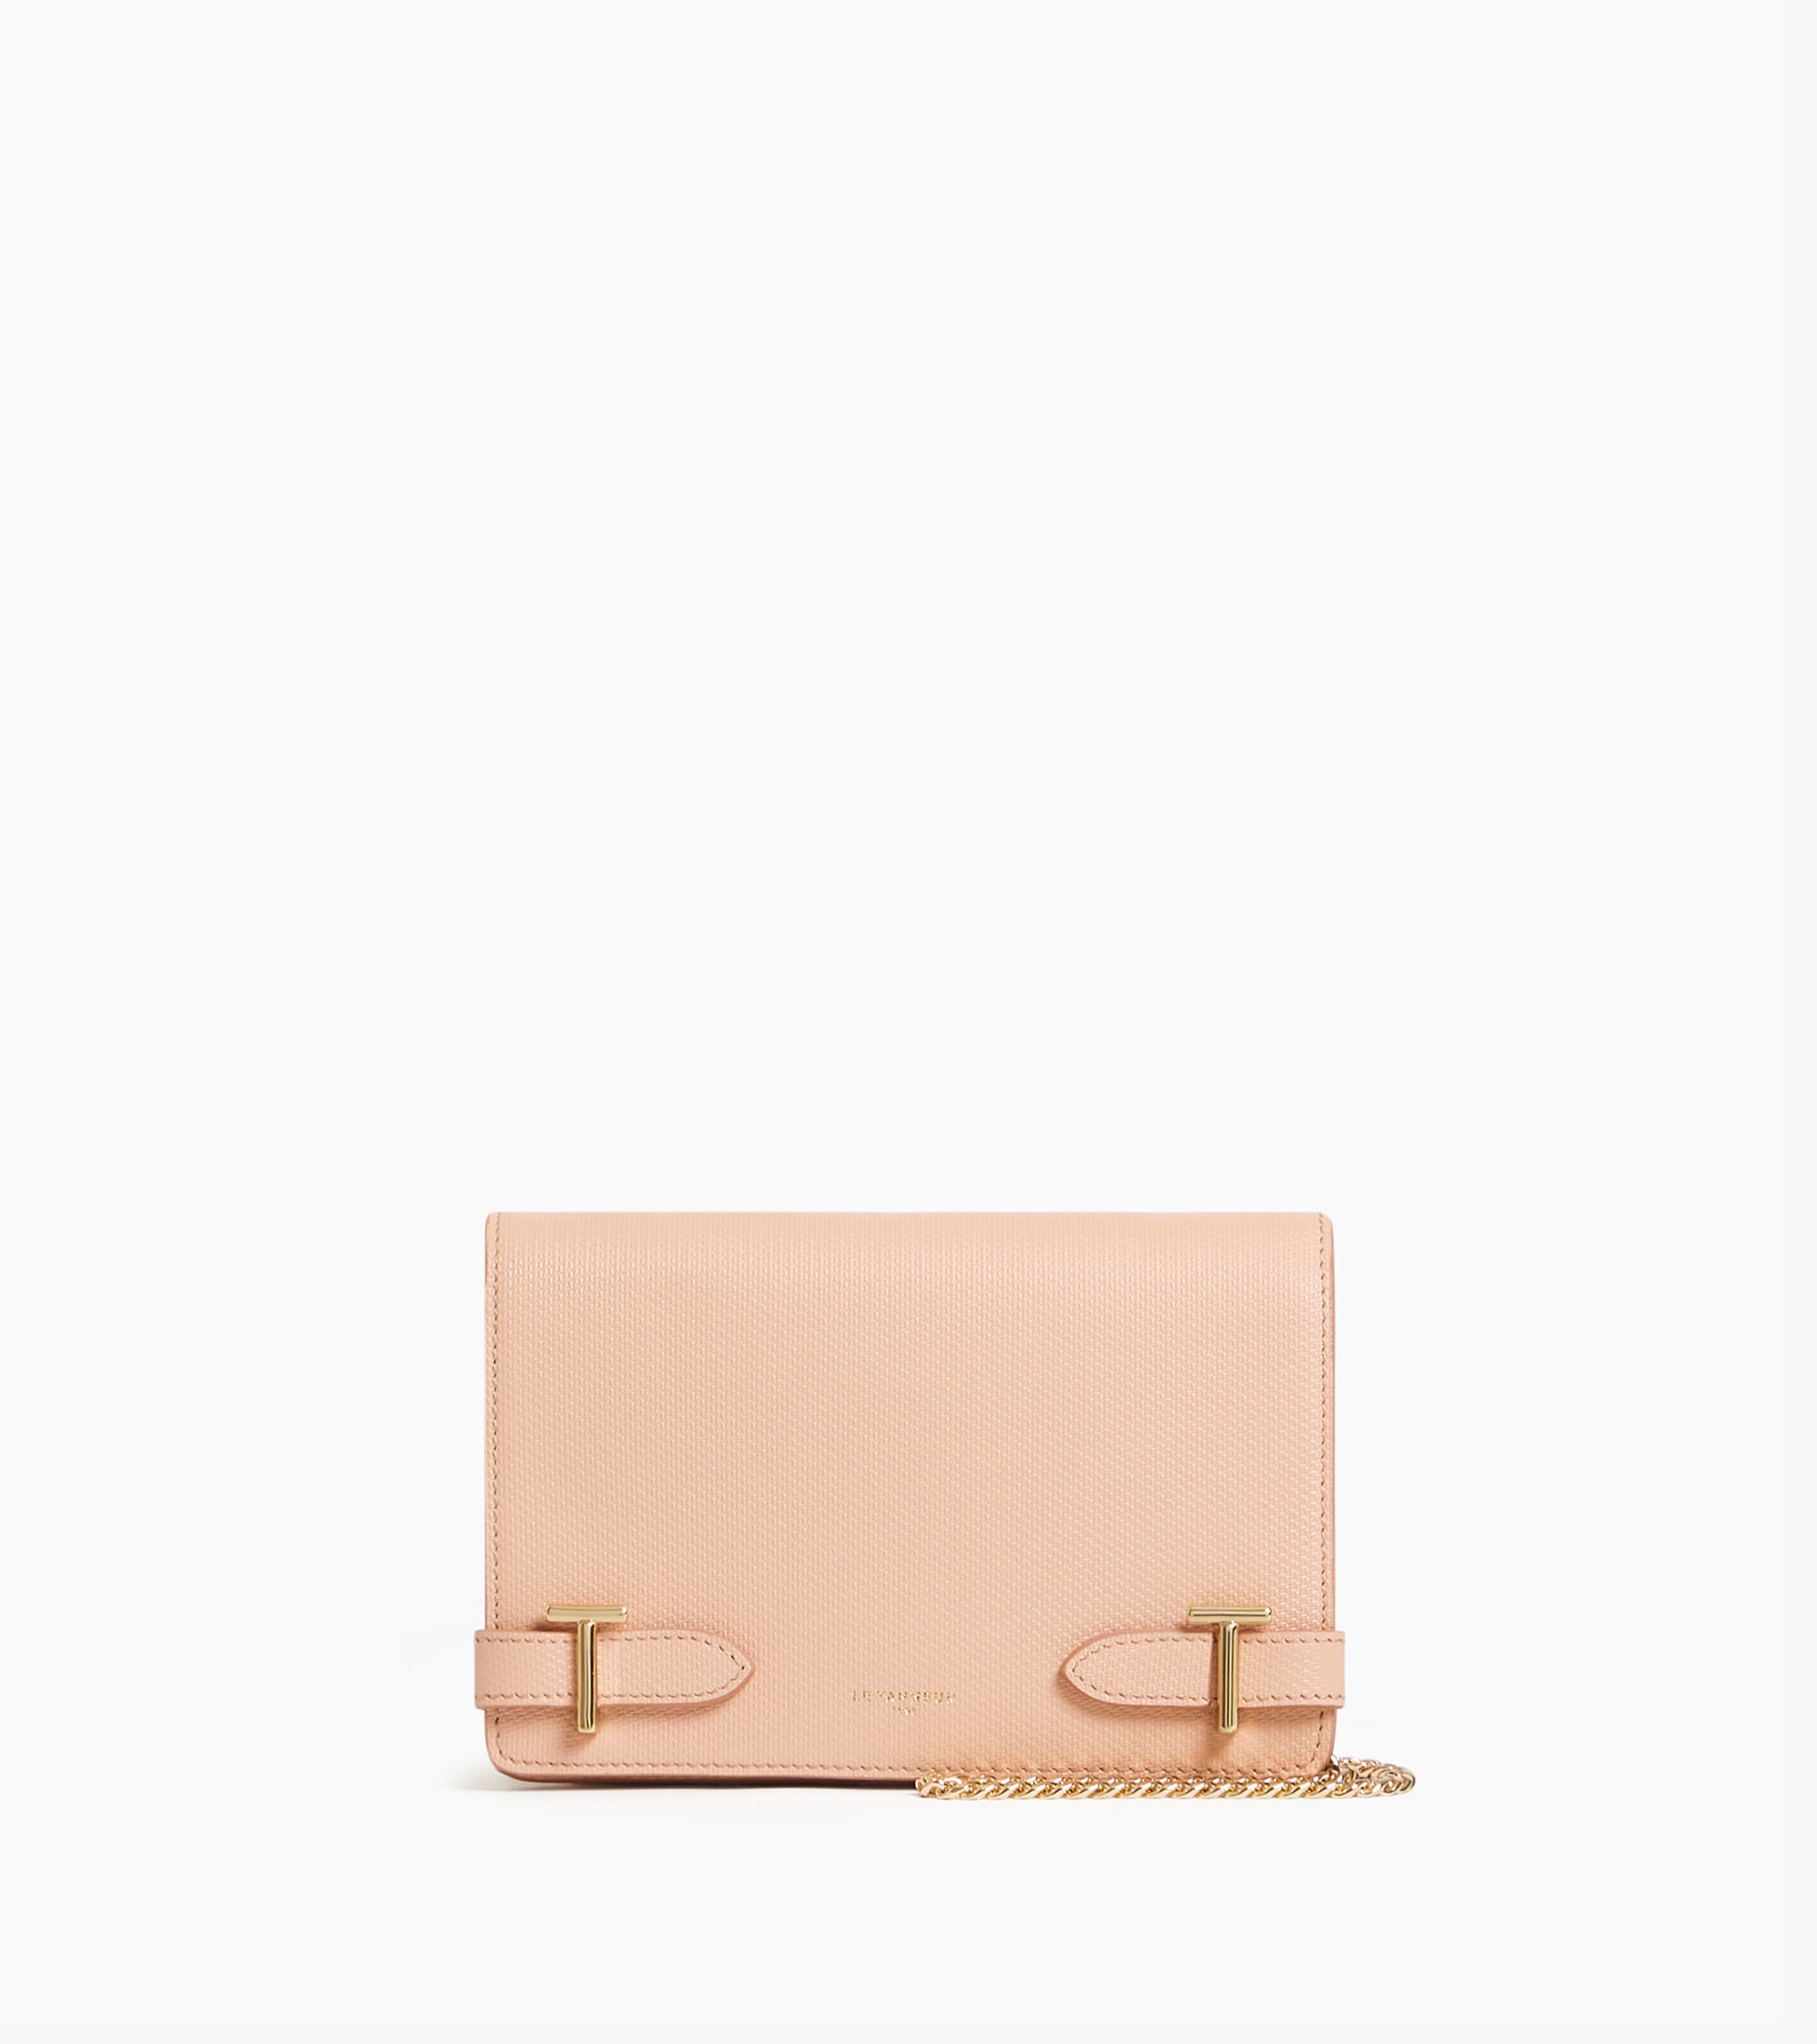 Emilie small bag with crossbody strap in signature T leather